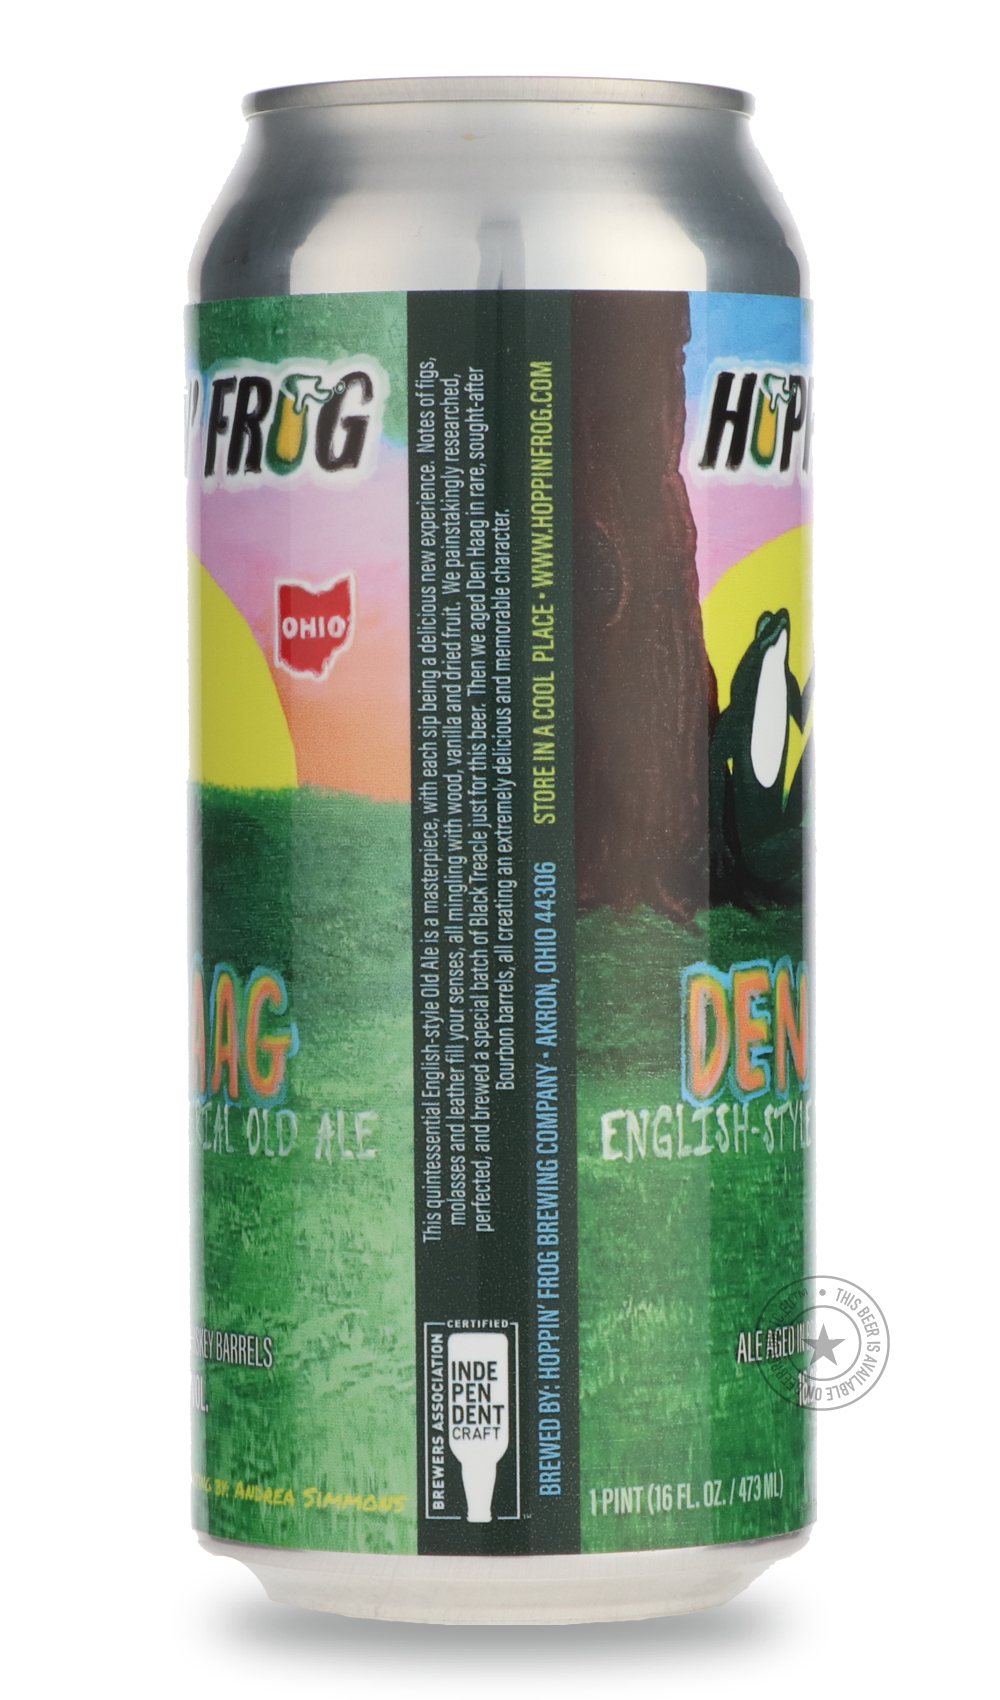 -Hoppin' Frog- Den Haag-Brown & Dark- Only @ Beer Republic - The best online beer store for American & Canadian craft beer - Buy beer online from the USA and Canada - Bier online kopen - Amerikaans bier kopen - Craft beer store - Craft beer kopen - Amerikanisch bier kaufen - Bier online kaufen - Acheter biere online - IPA - Stout - Porter - New England IPA - Hazy IPA - Imperial Stout - Barrel Aged - Barrel Aged Imperial Stout - Brown - Dark beer - Blond - Blonde - Pilsner - Lager - Wheat - Weizen - Amber - 